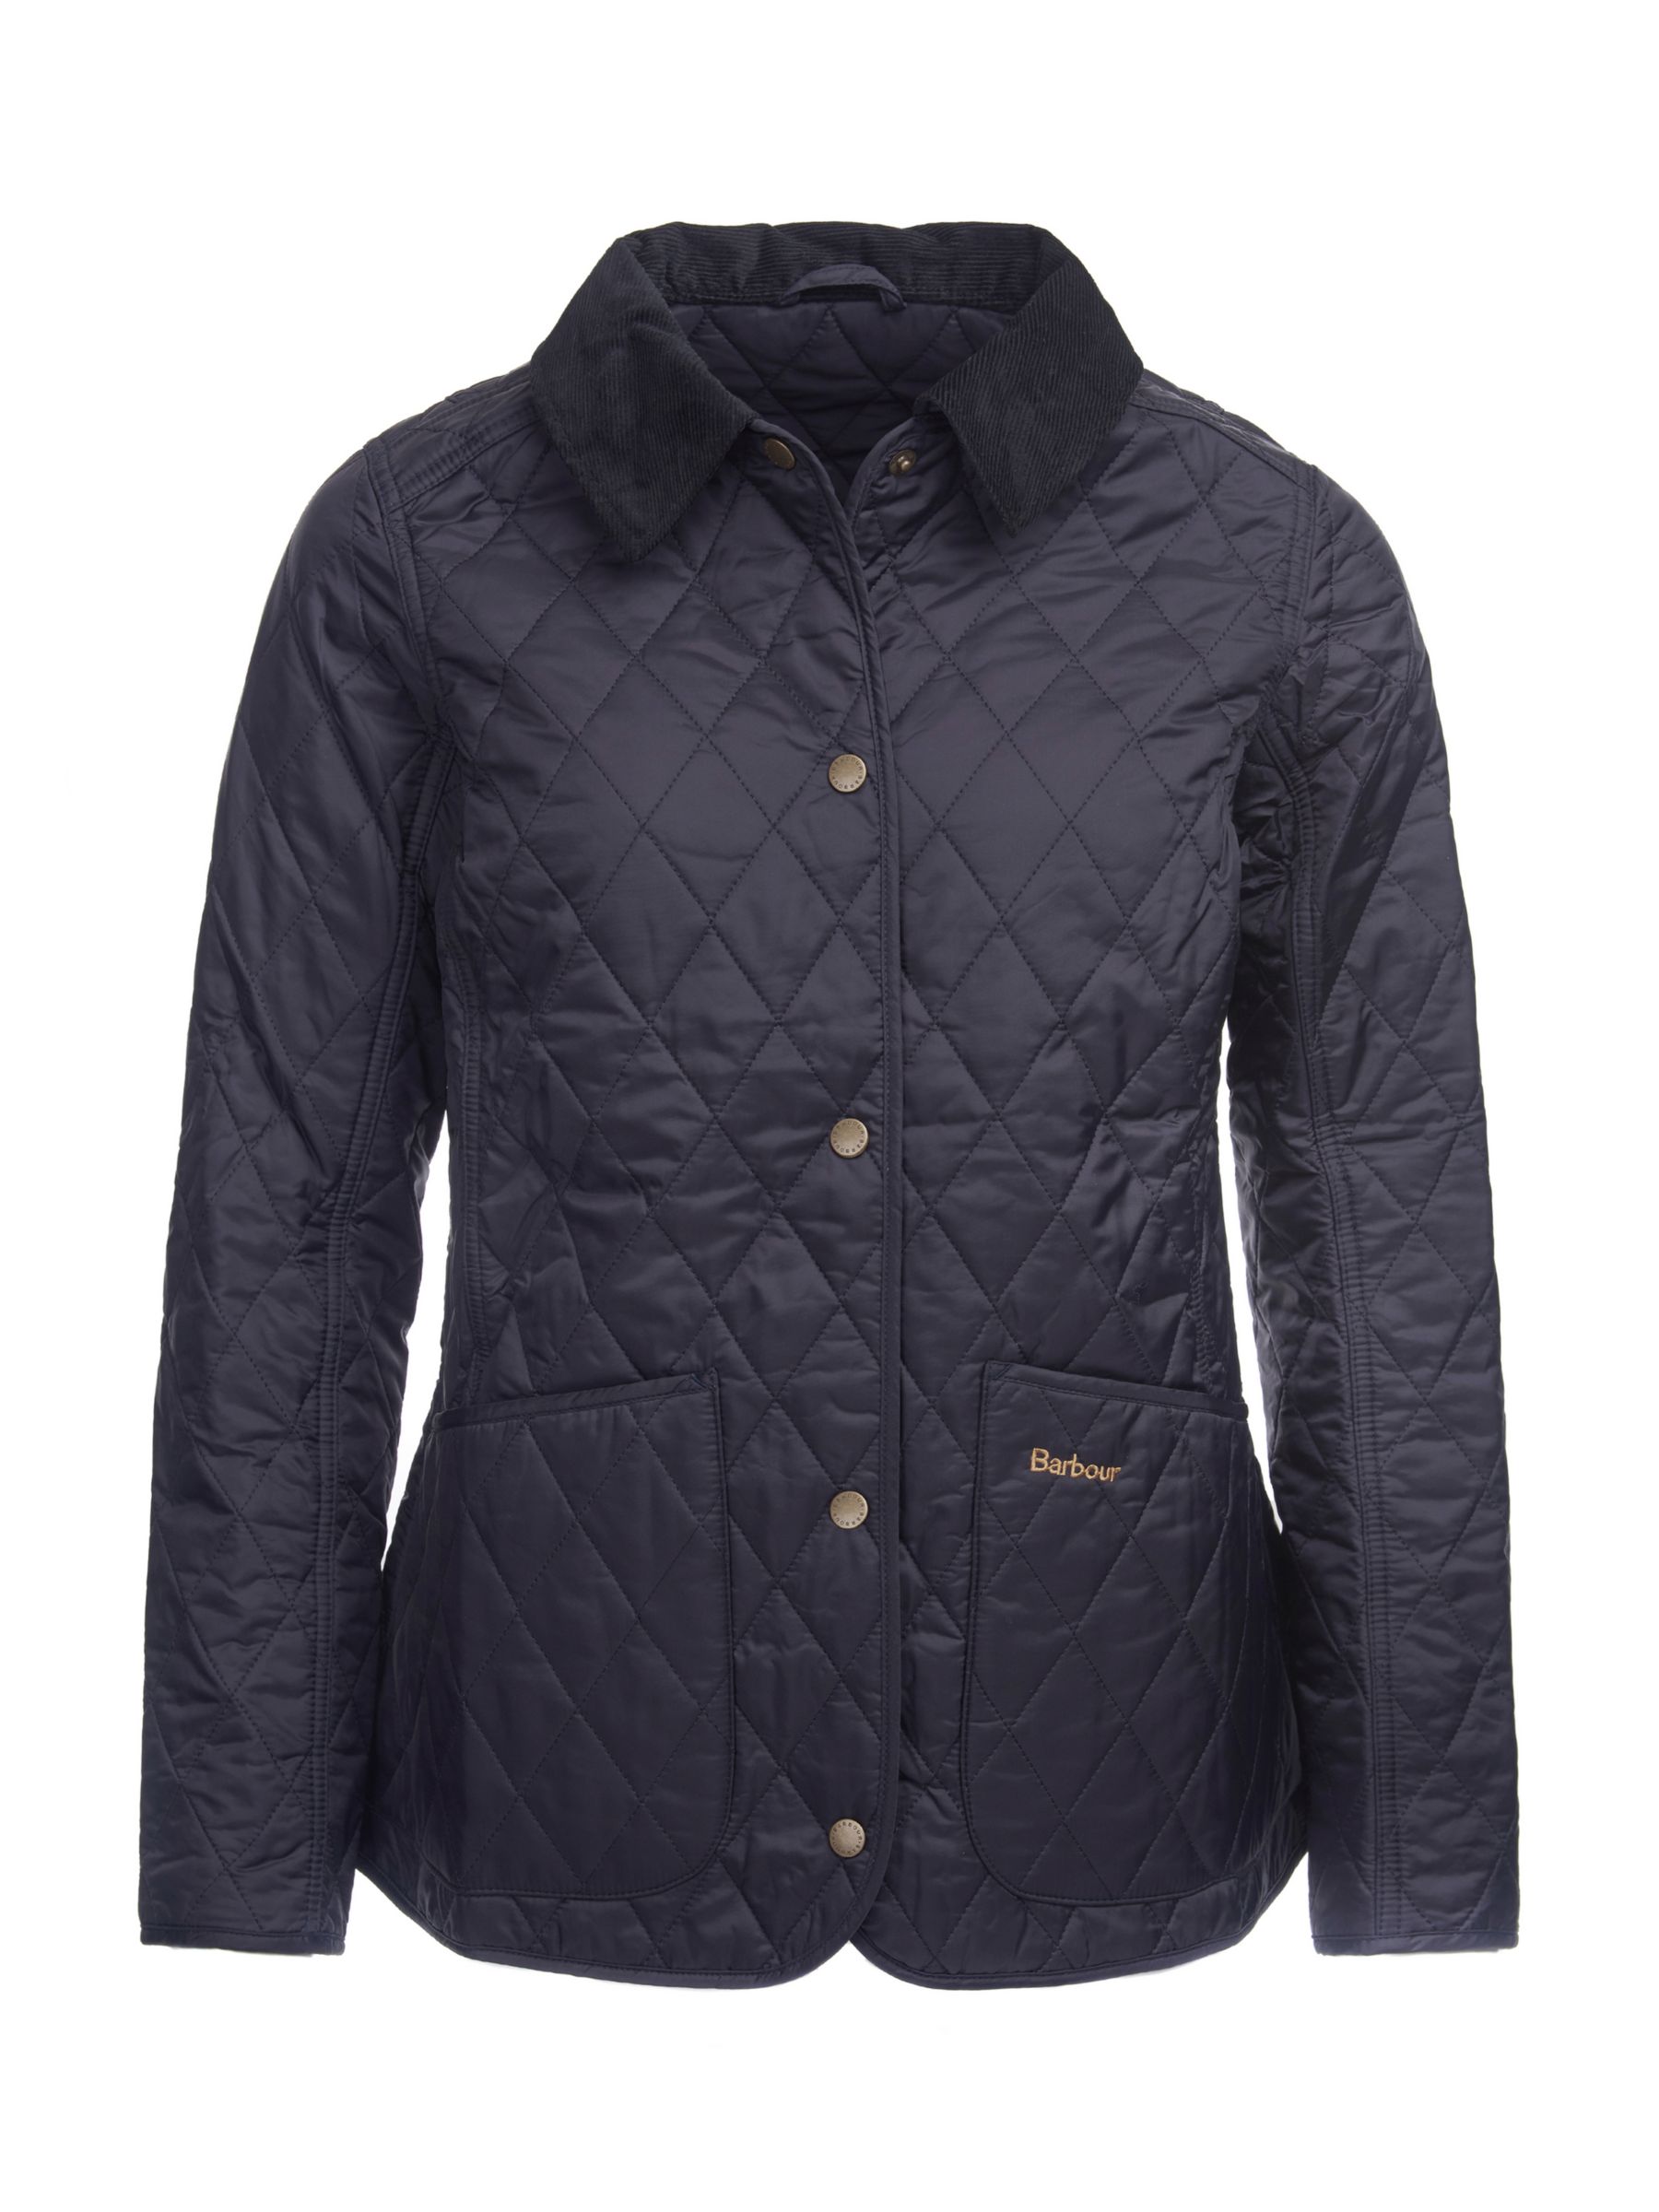 Barbour Annadale Quilted Jacket, Navy at John Lewis & Partners